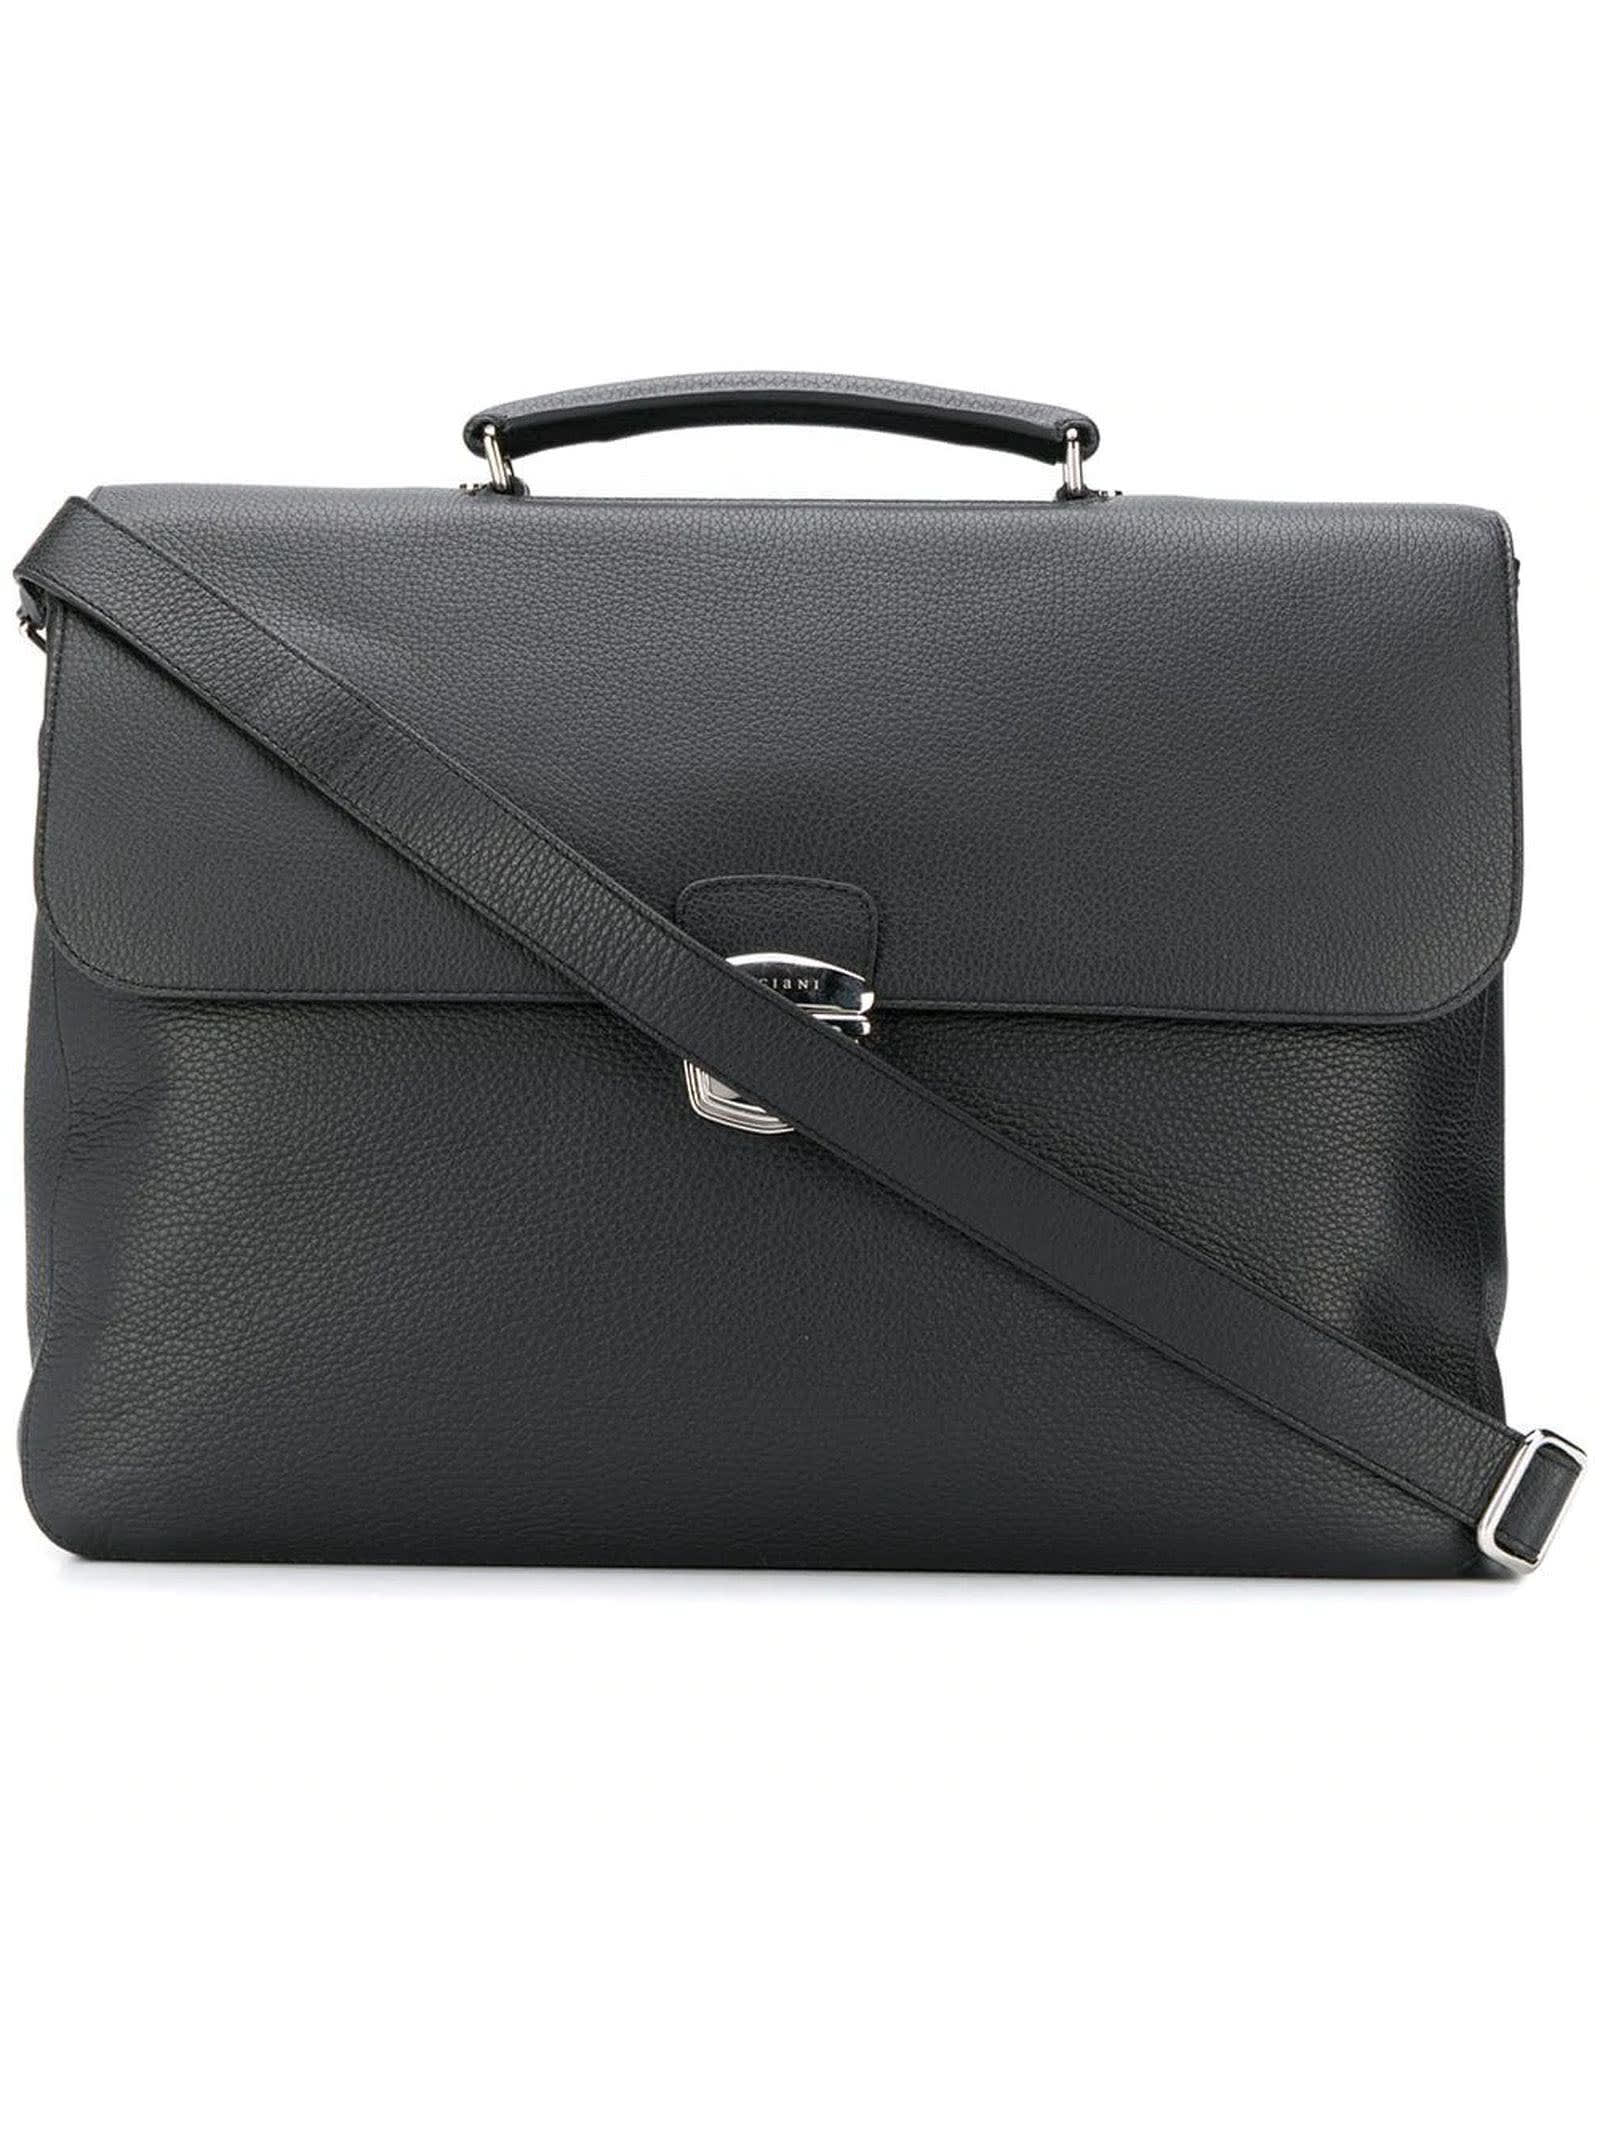 Orciani Micron Deep Black Leather Large Briefcase